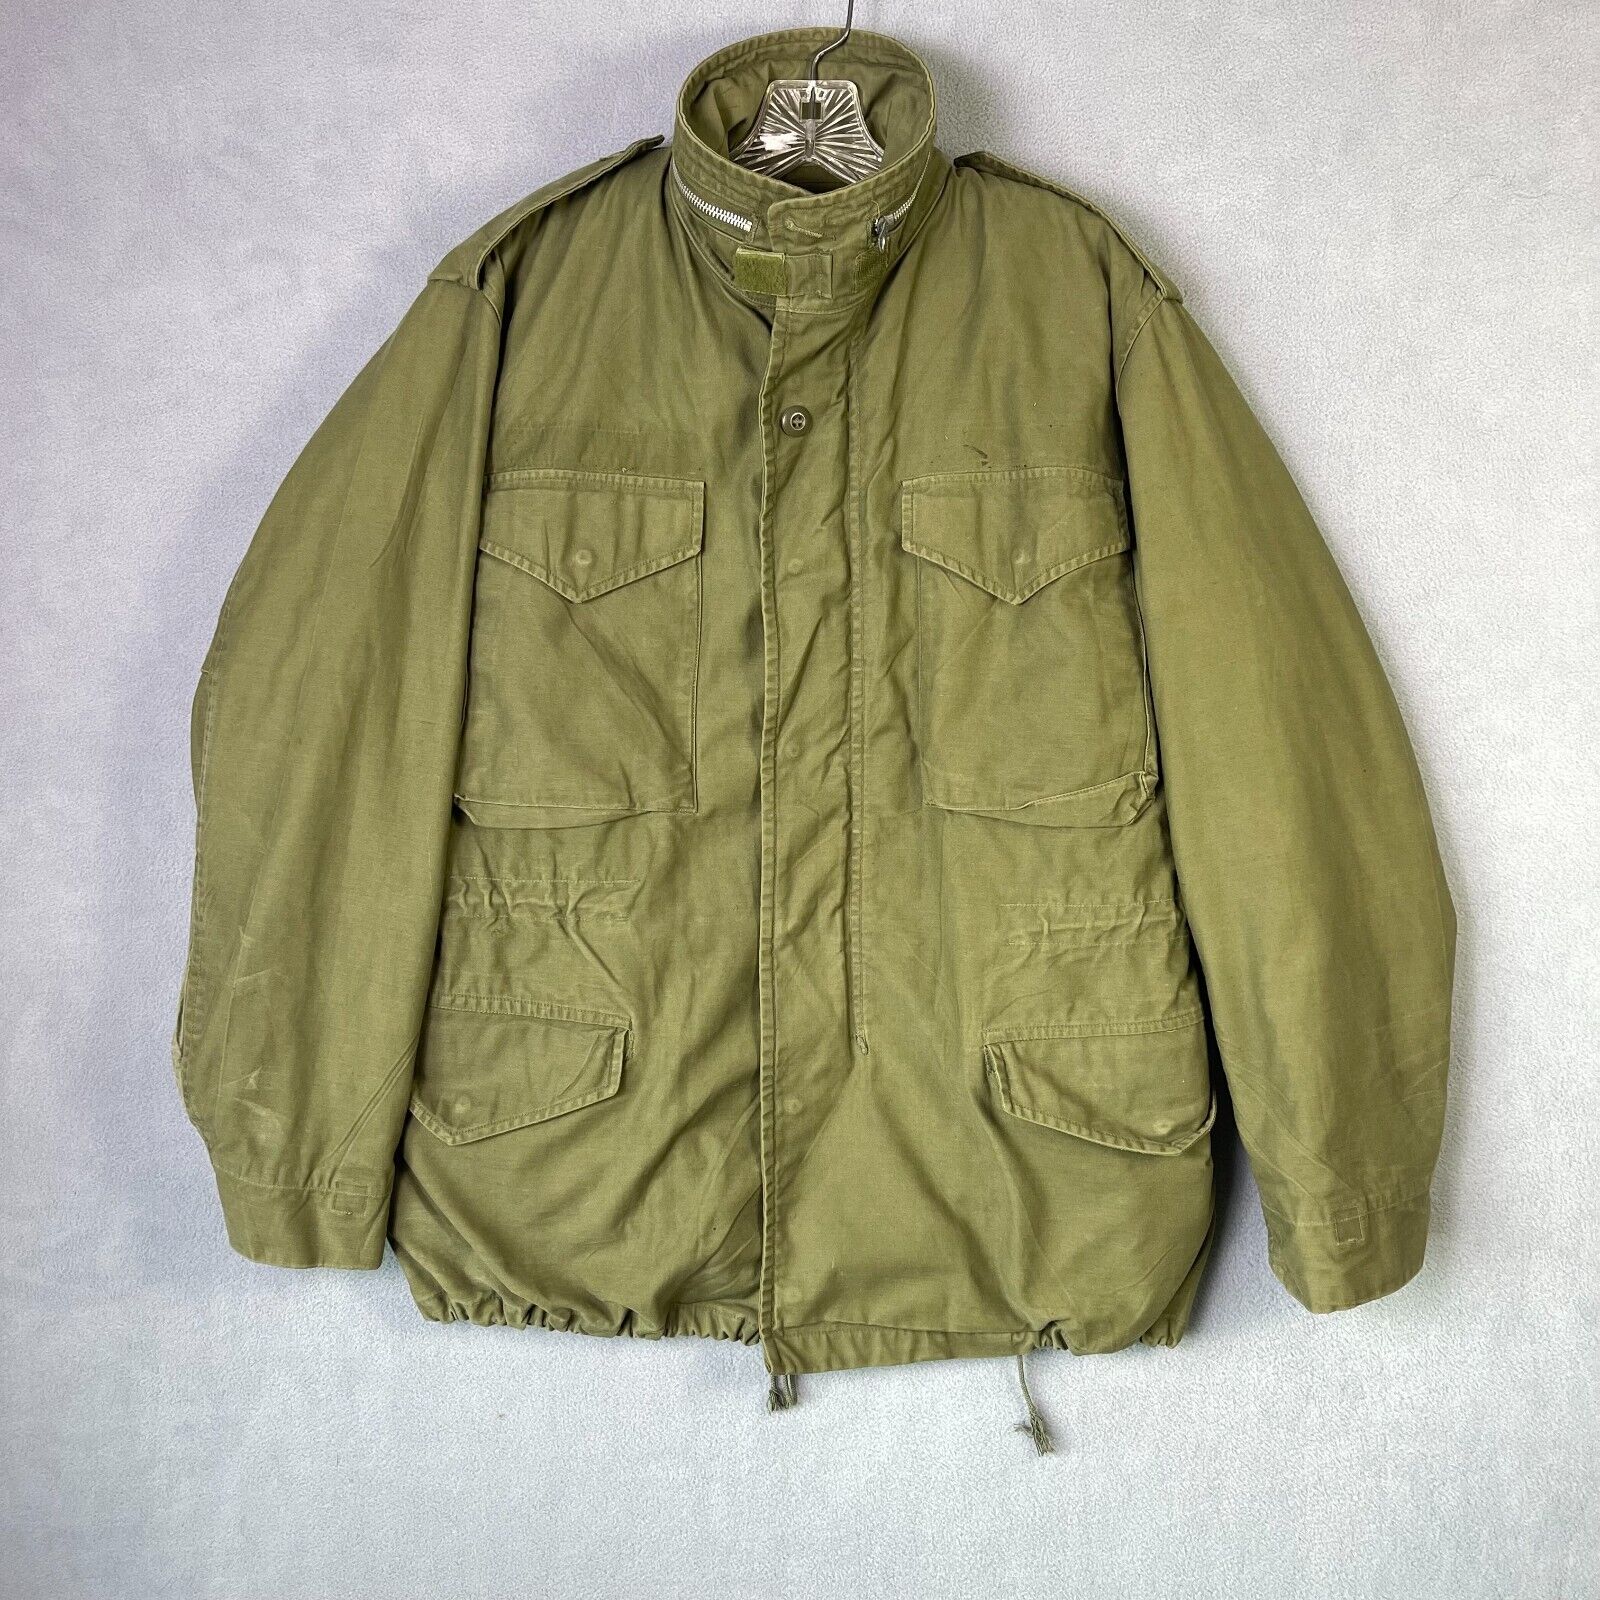 Vintage Military Coat Adult Small Green Distressed Liner Cold Weather Field 80s